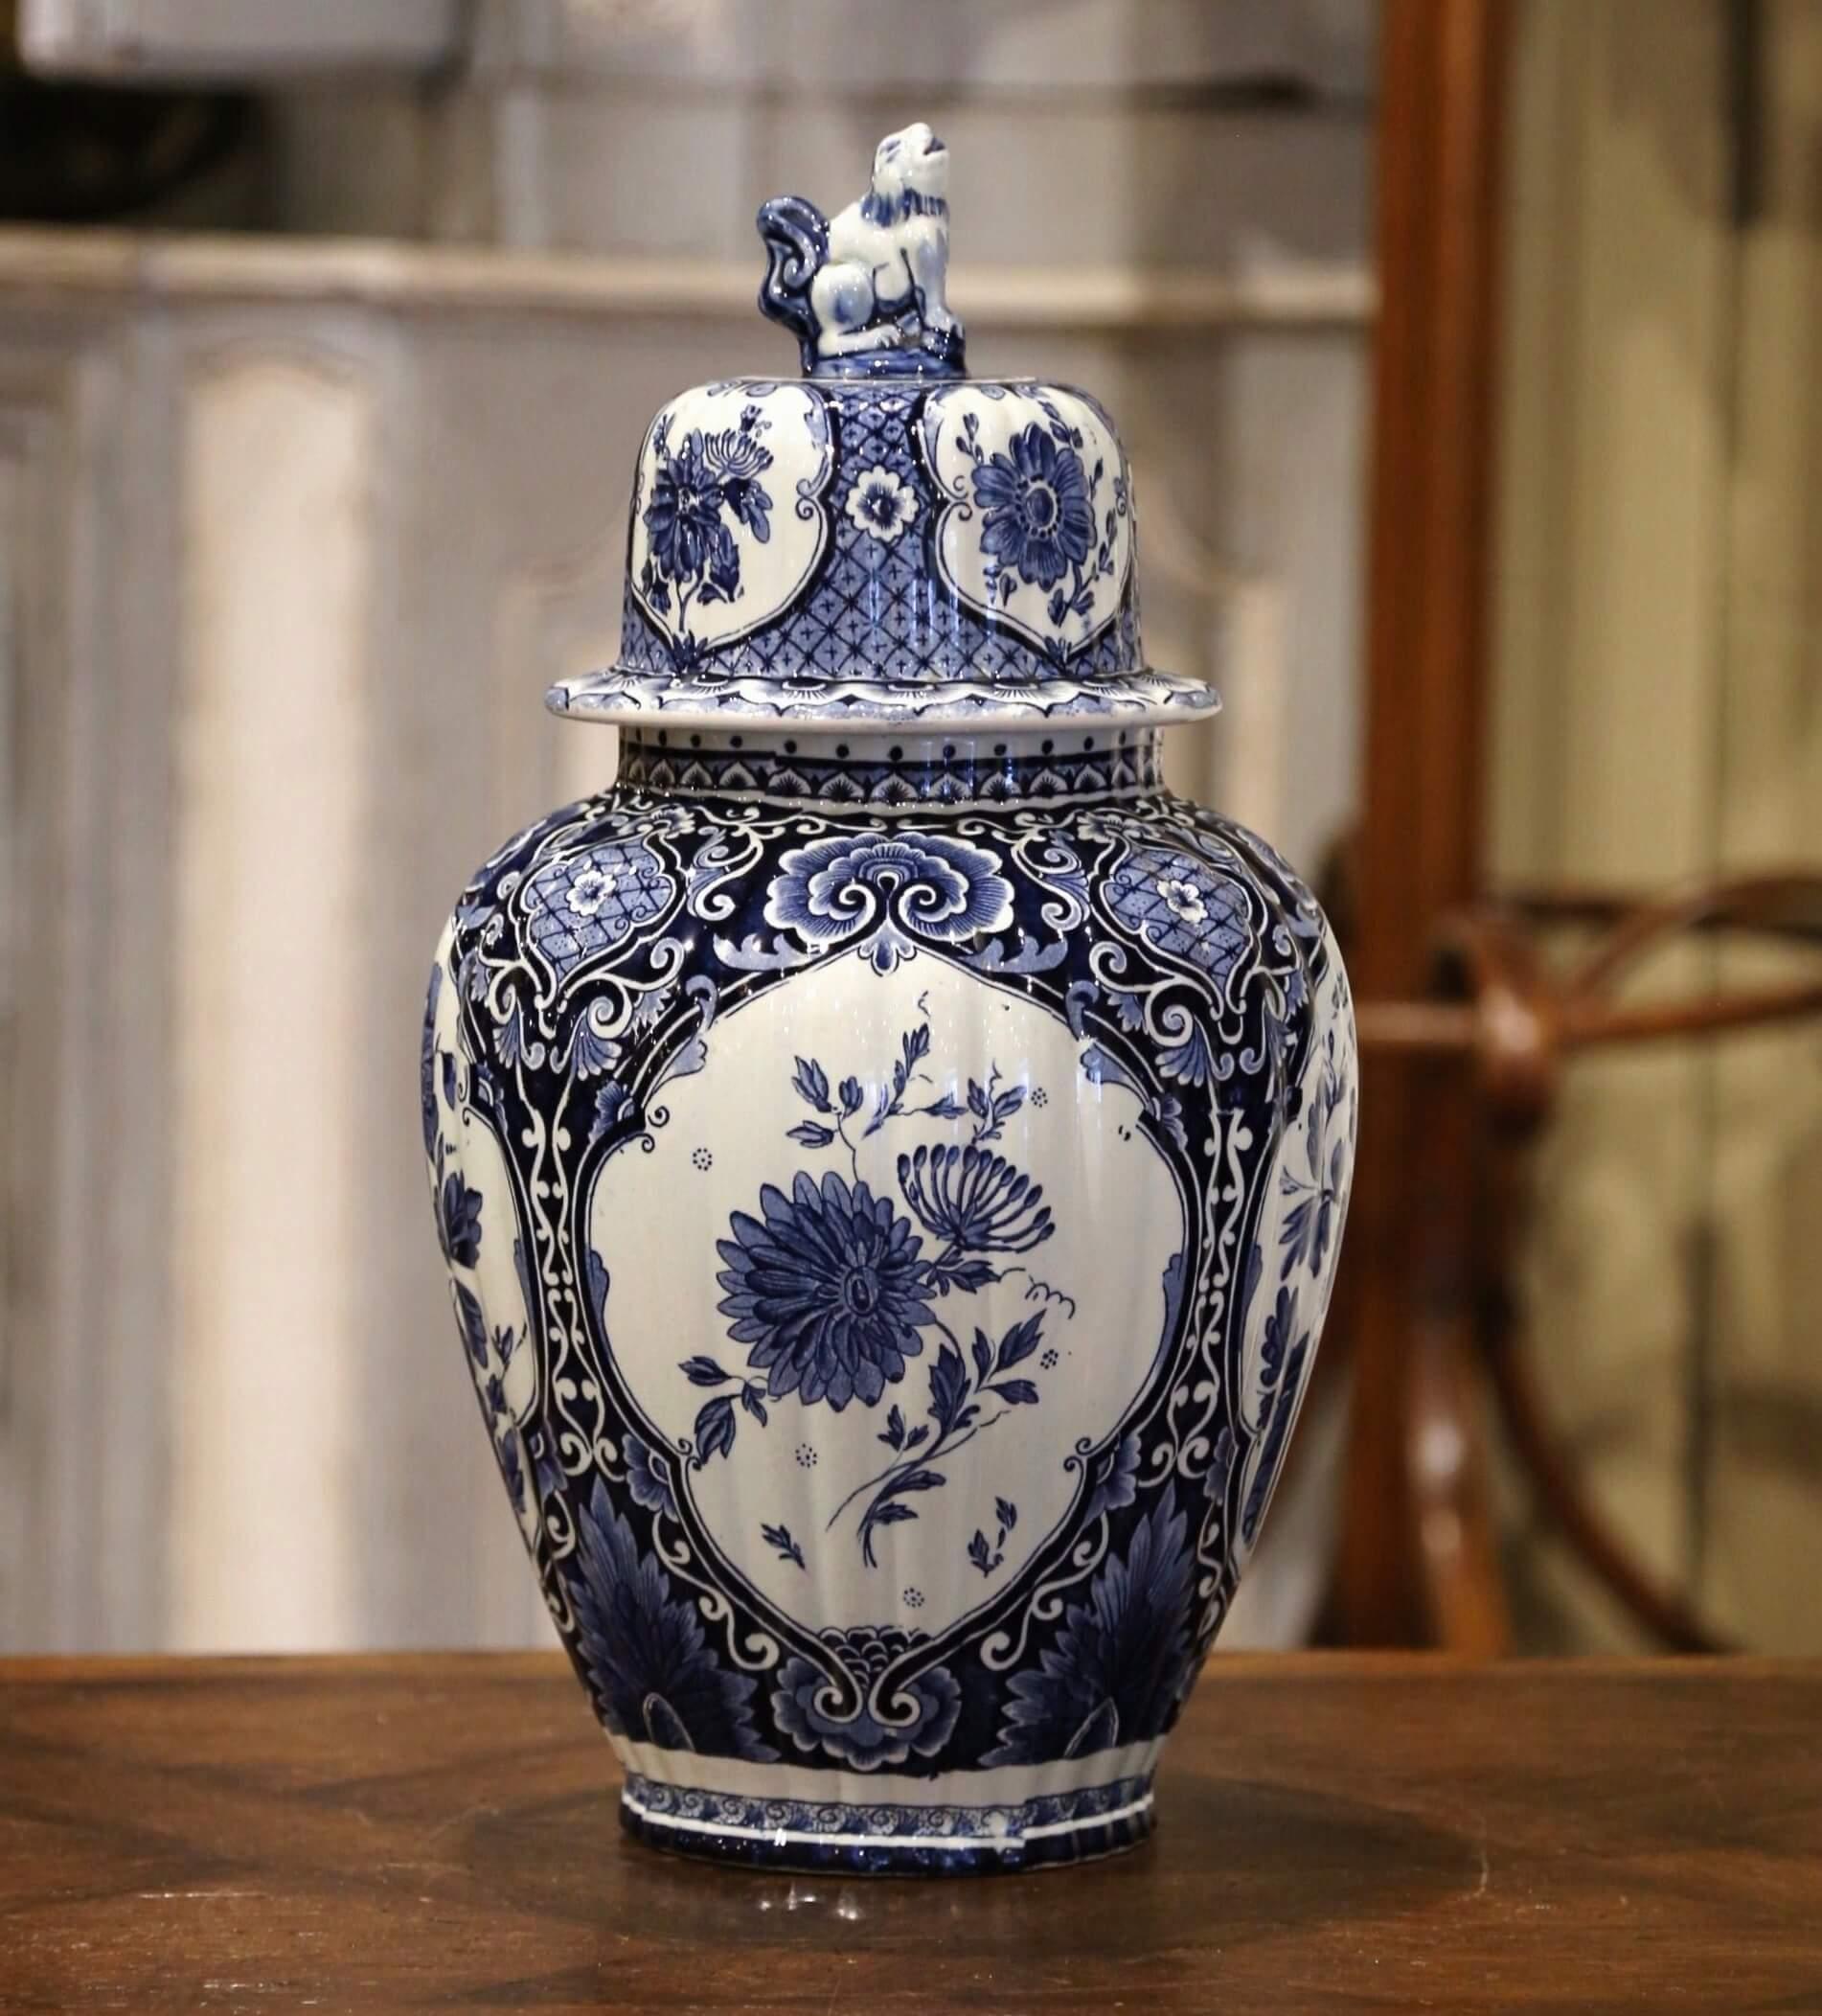 Crafted in Holland, circa 1950, the large faience potiche features hand painted medallions with Classic Dutch flower and foliage decor. The traditional blue and white jar is round in shape and has a cone lid embellished with dog figure at the top.